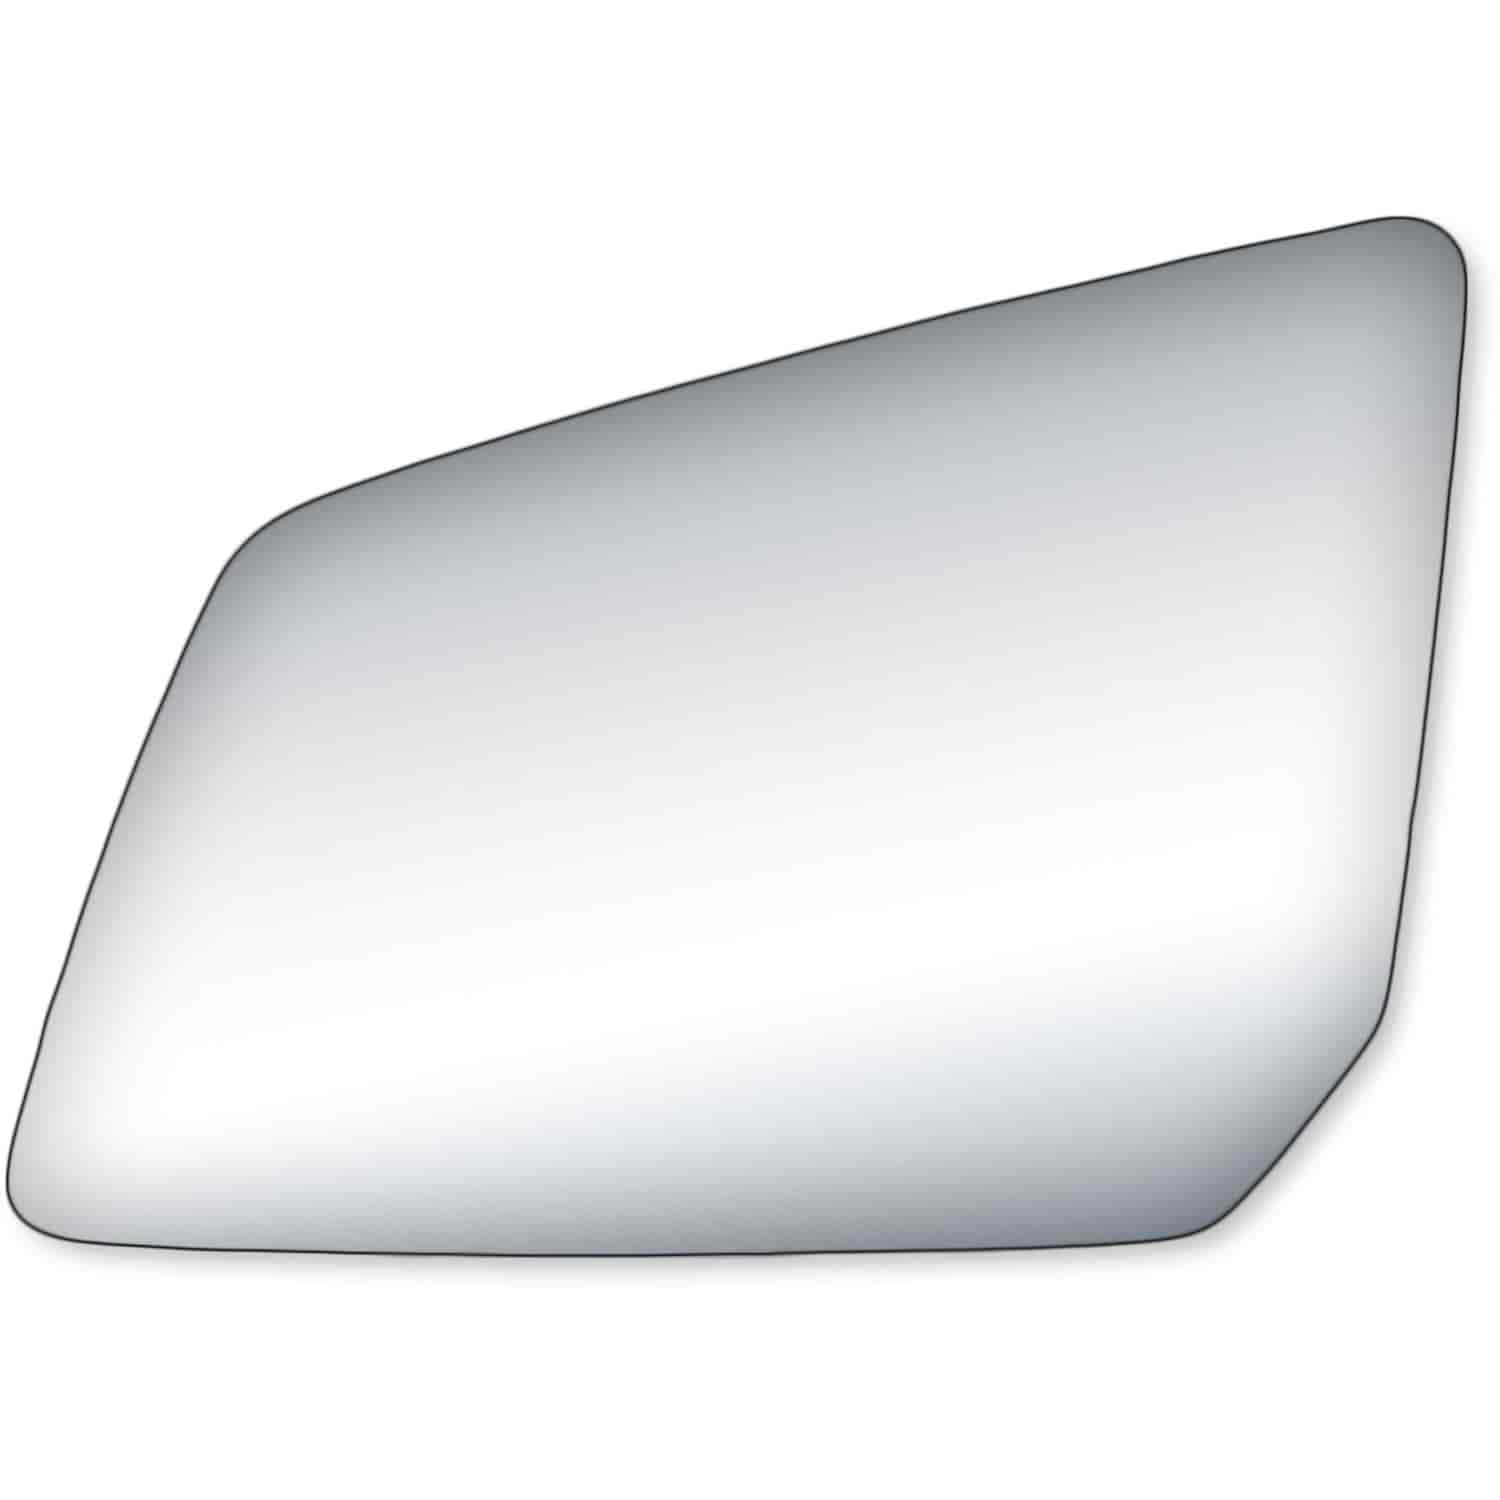 Replacement Glass for 09-14 Traverse w/out blind spot lens ; 07-13 Acadia w/out spot mirror ; 07-10